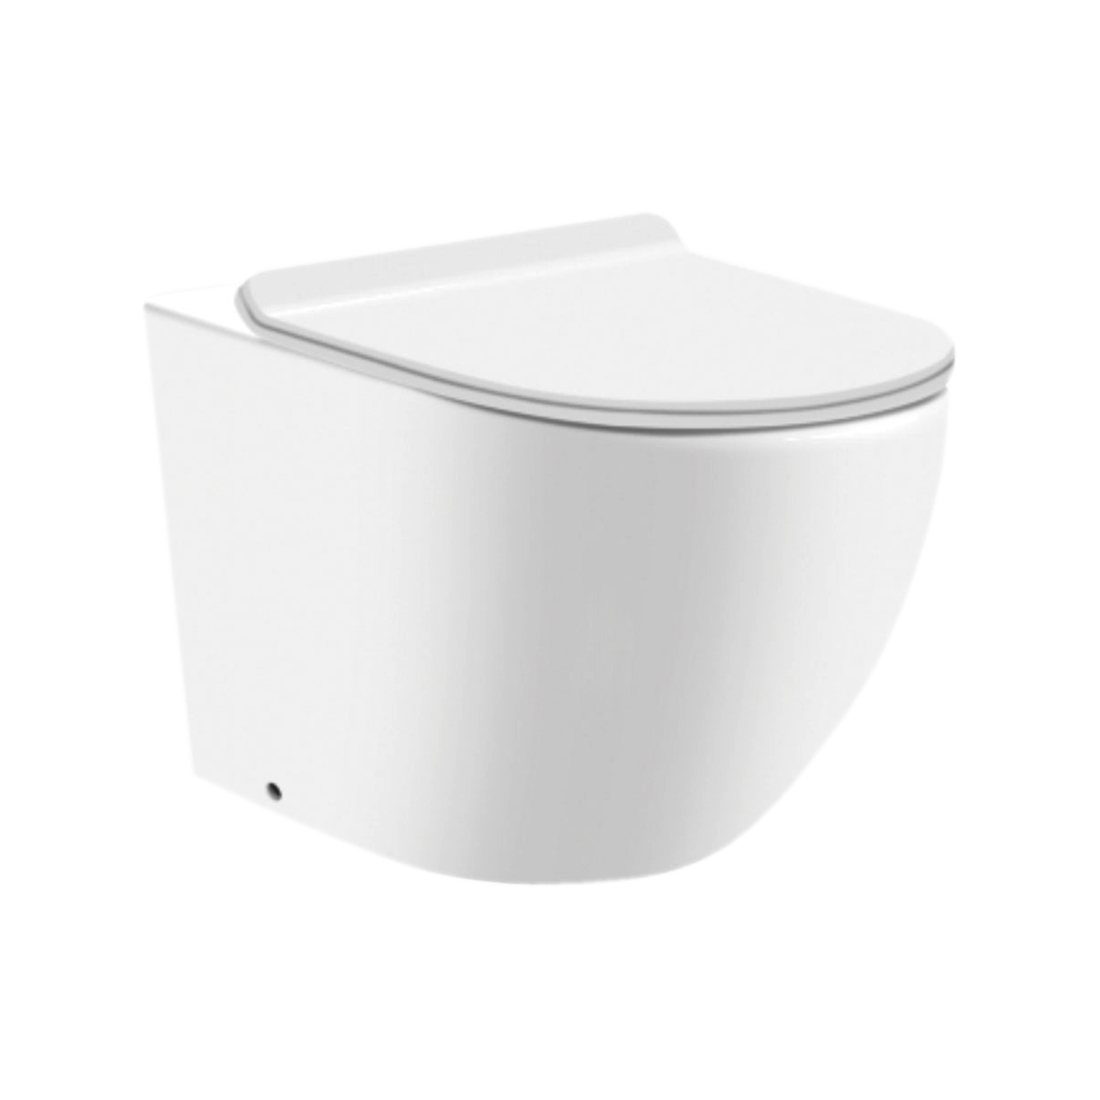 Kerovit Marshal KB2141D-R Close Couched Rimfree Water Closet With Seat Cover